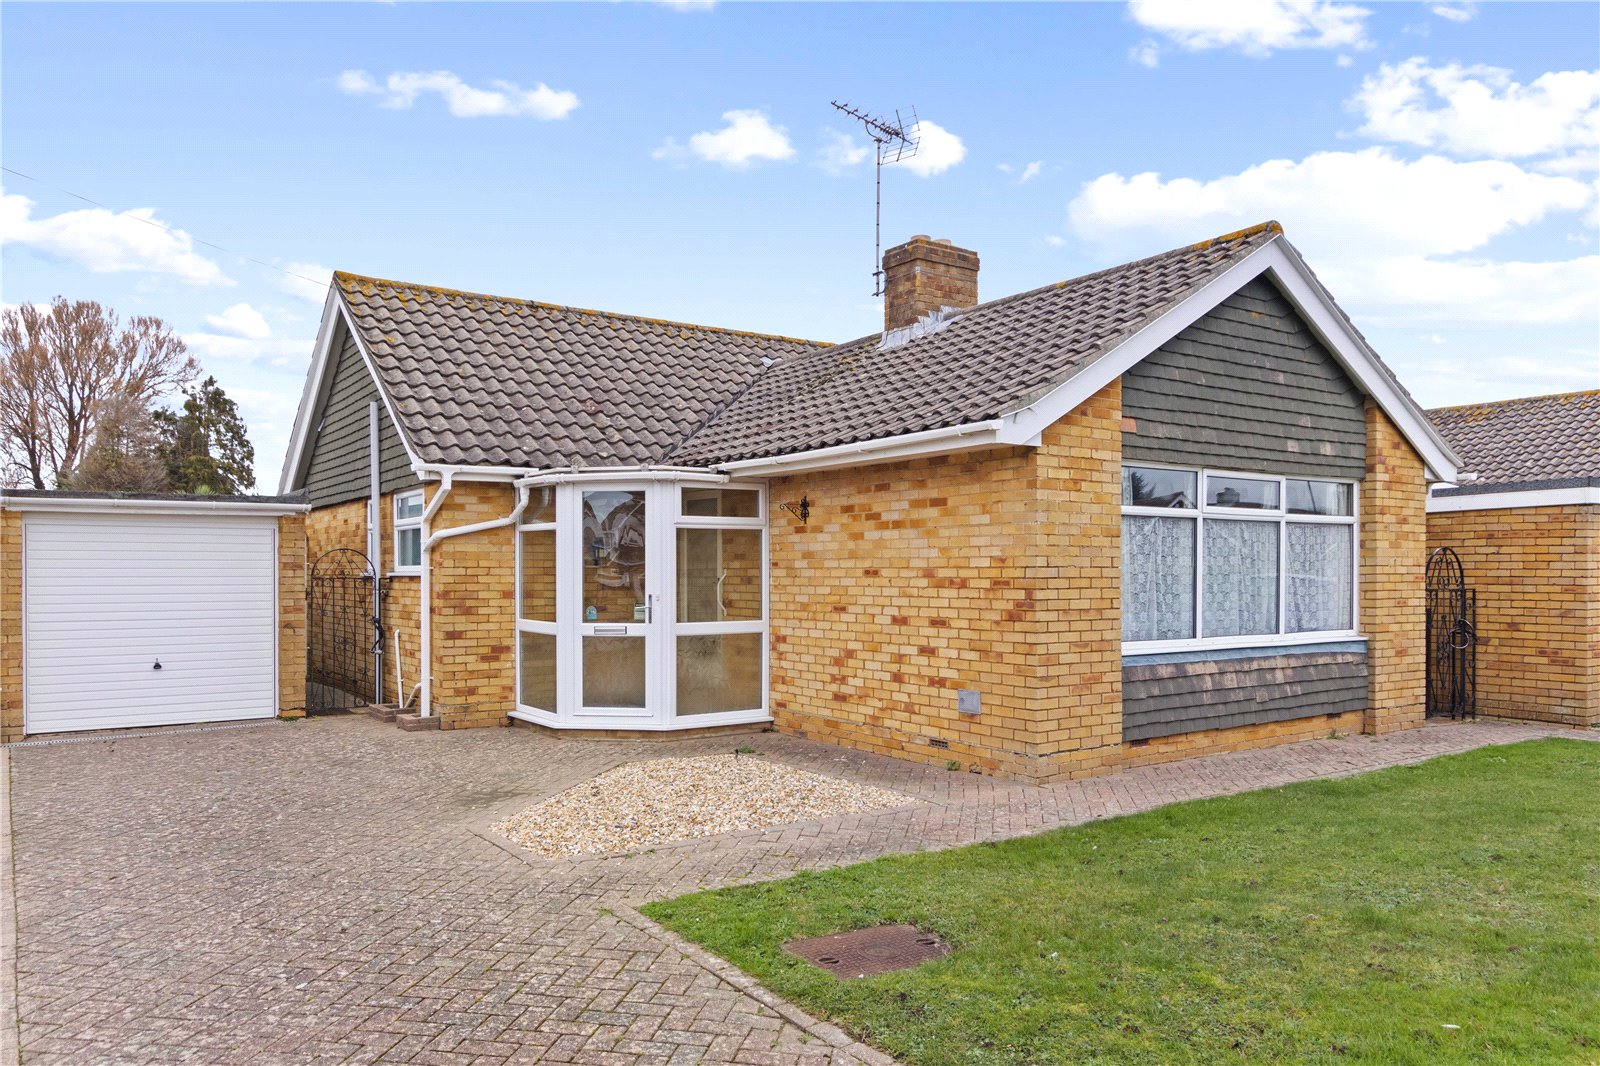 2 bed bungalow for sale in Trinity Way, West Meads - Property Image 1